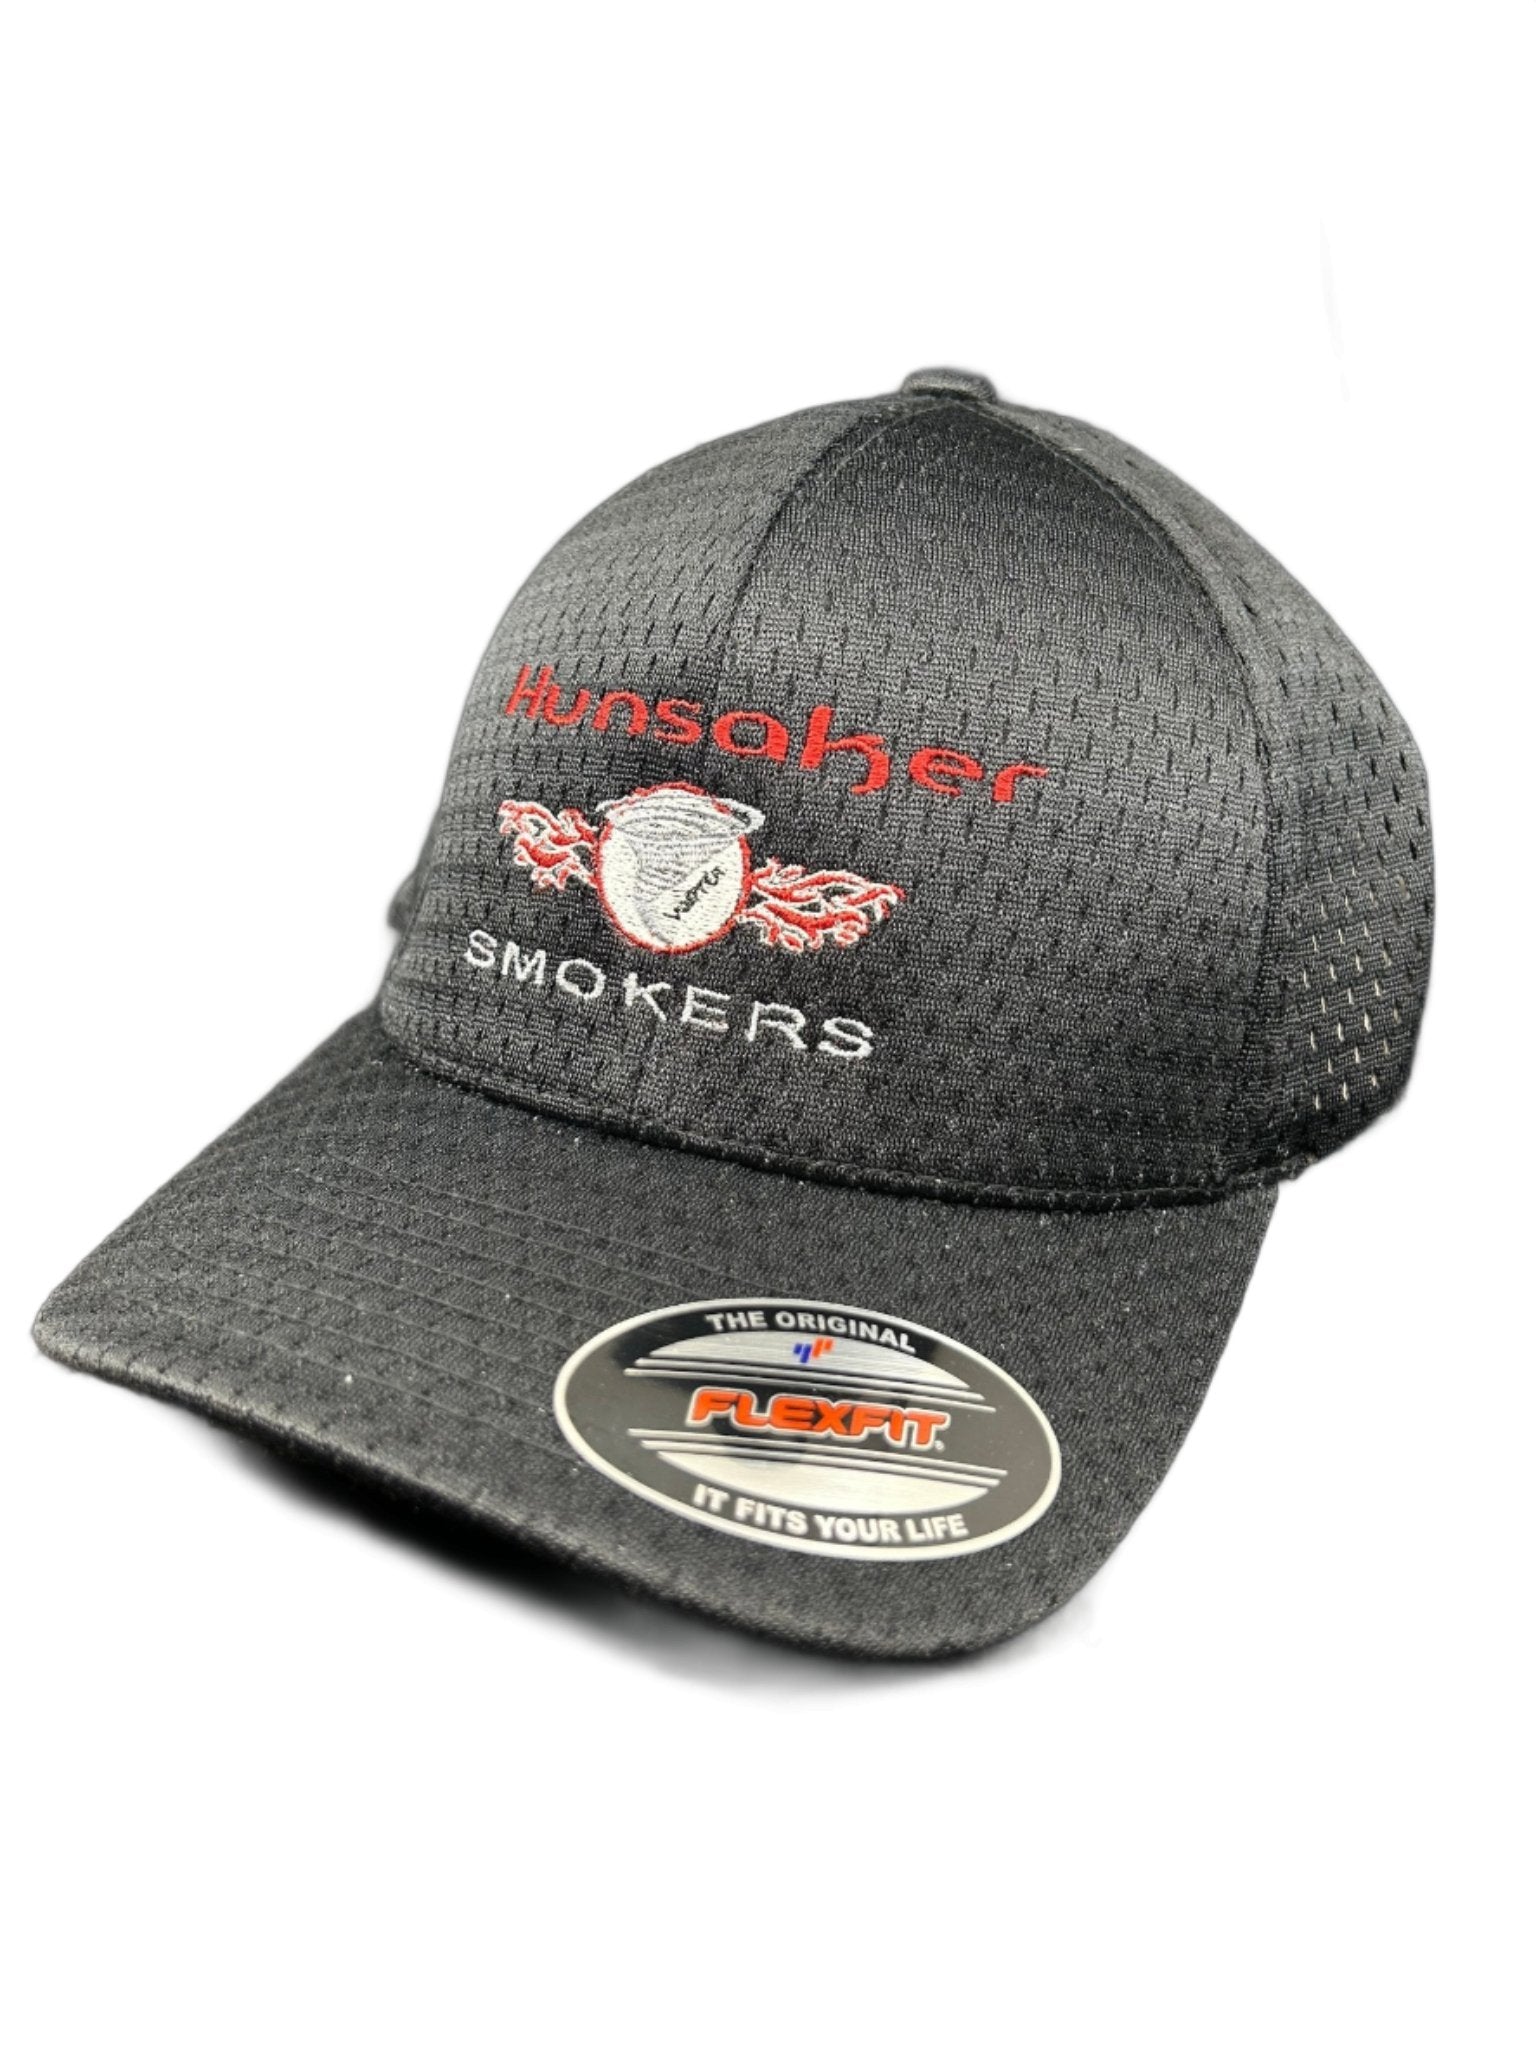 Hunsaker Smokers Universal Fit Hat: Stay Cool and Stylish While Grilling - Hunsaker Vortex Smokers